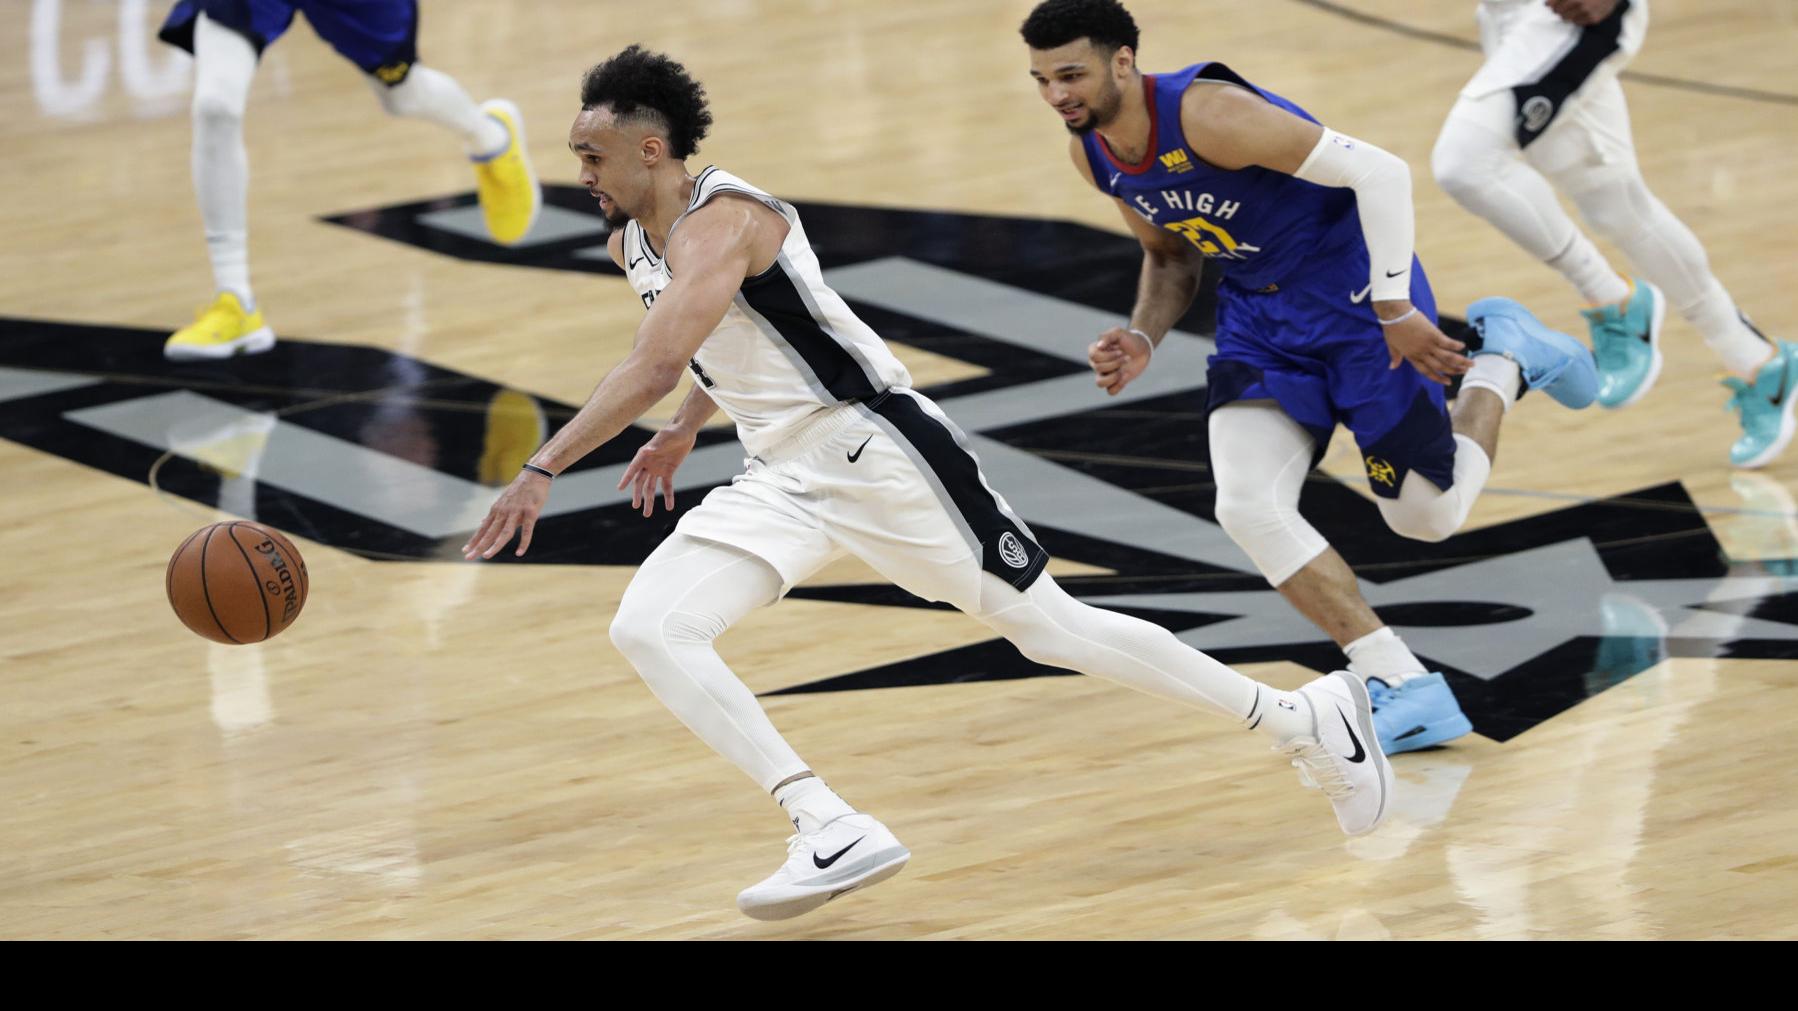 Paul Klee: Former UCCS star Derrick White munches Nuggets in 'spectacular'  Game 3 Spurs win | Sports 